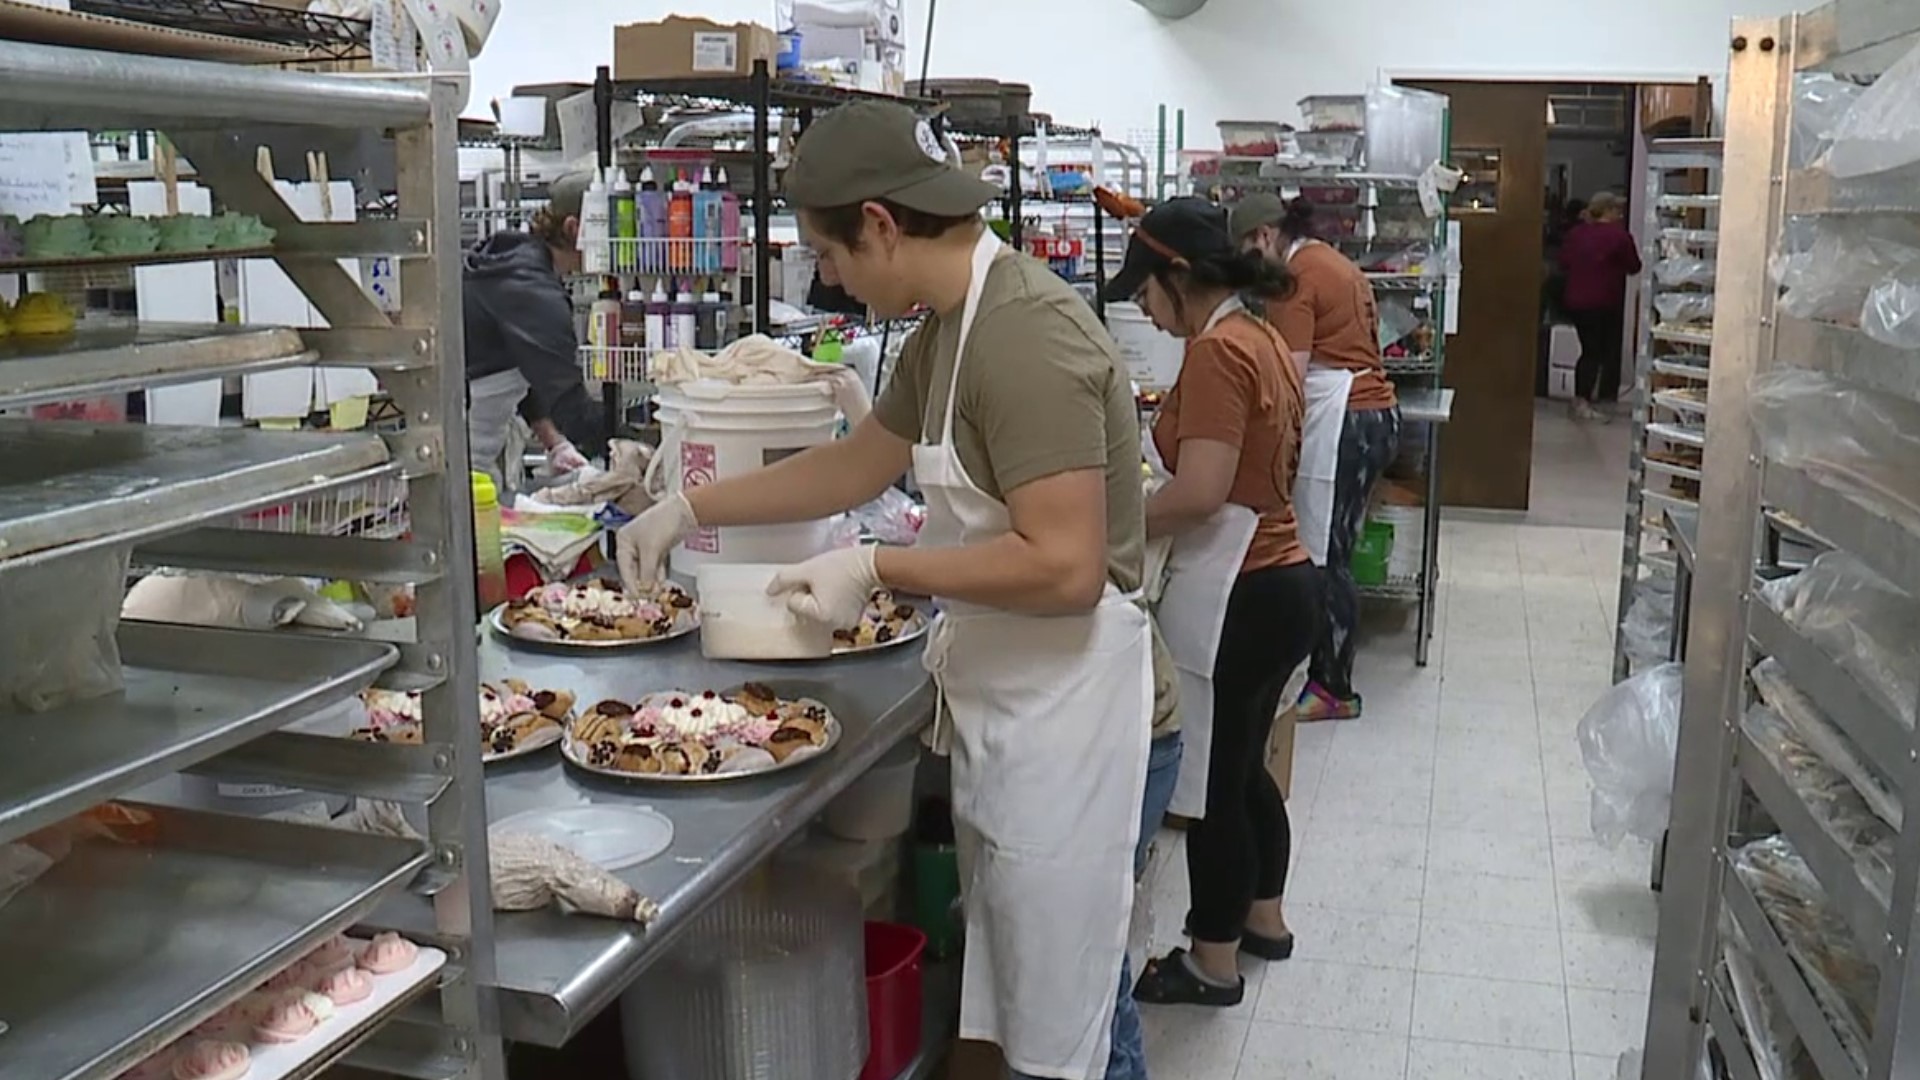 While many people have off for the Thanksgiving holiday, not everyone does. That includes a bakery in Scranton.